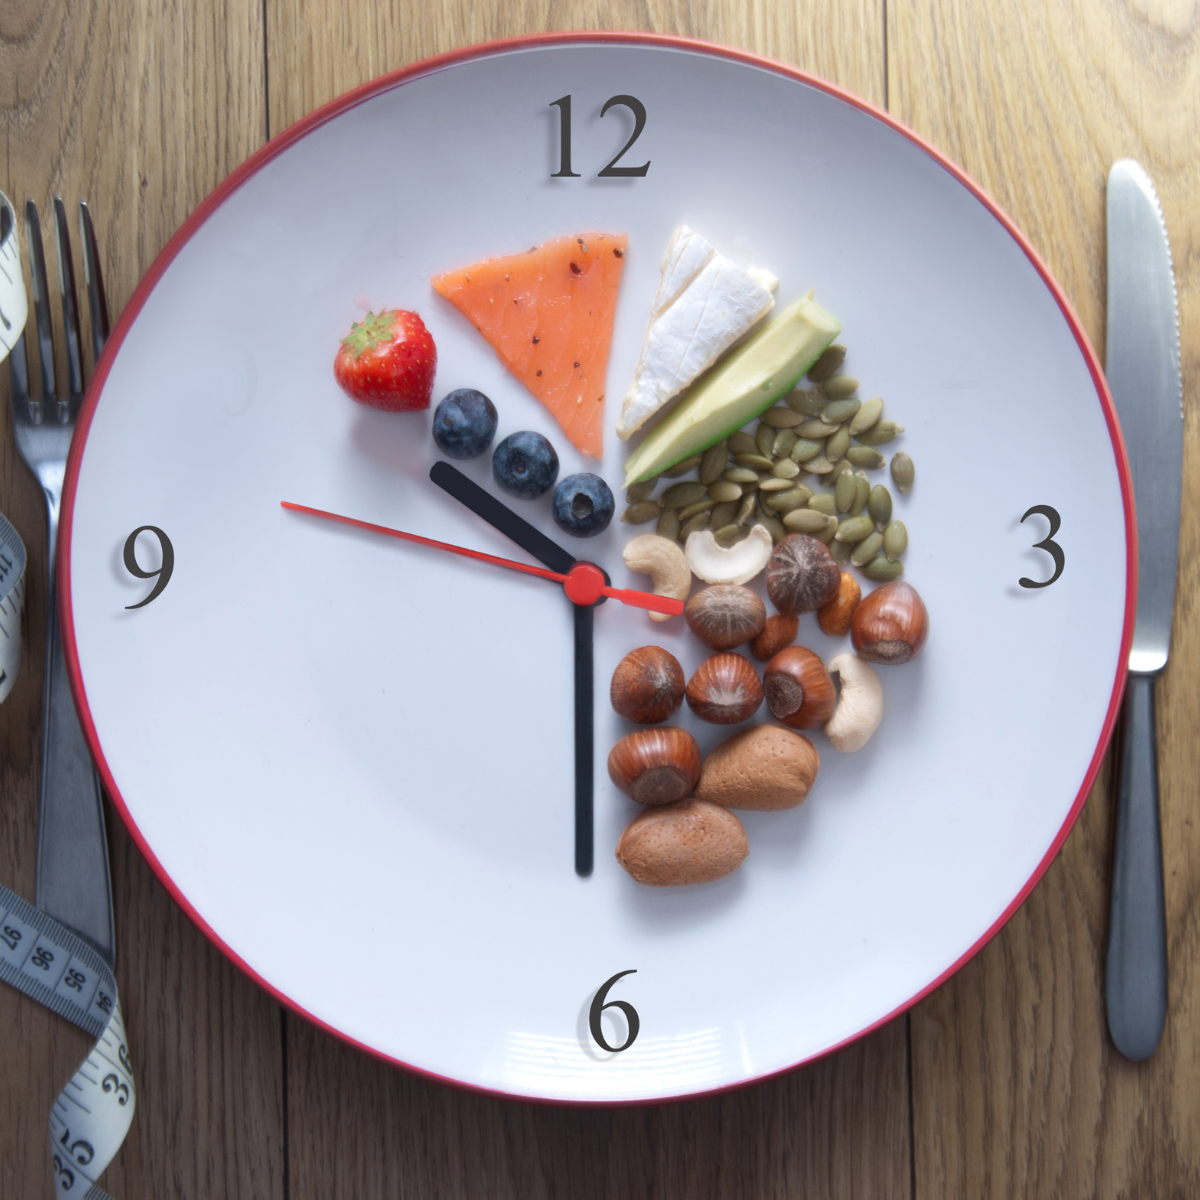 Timing of Light Exposure and Eating to Optimize Circadian Biology